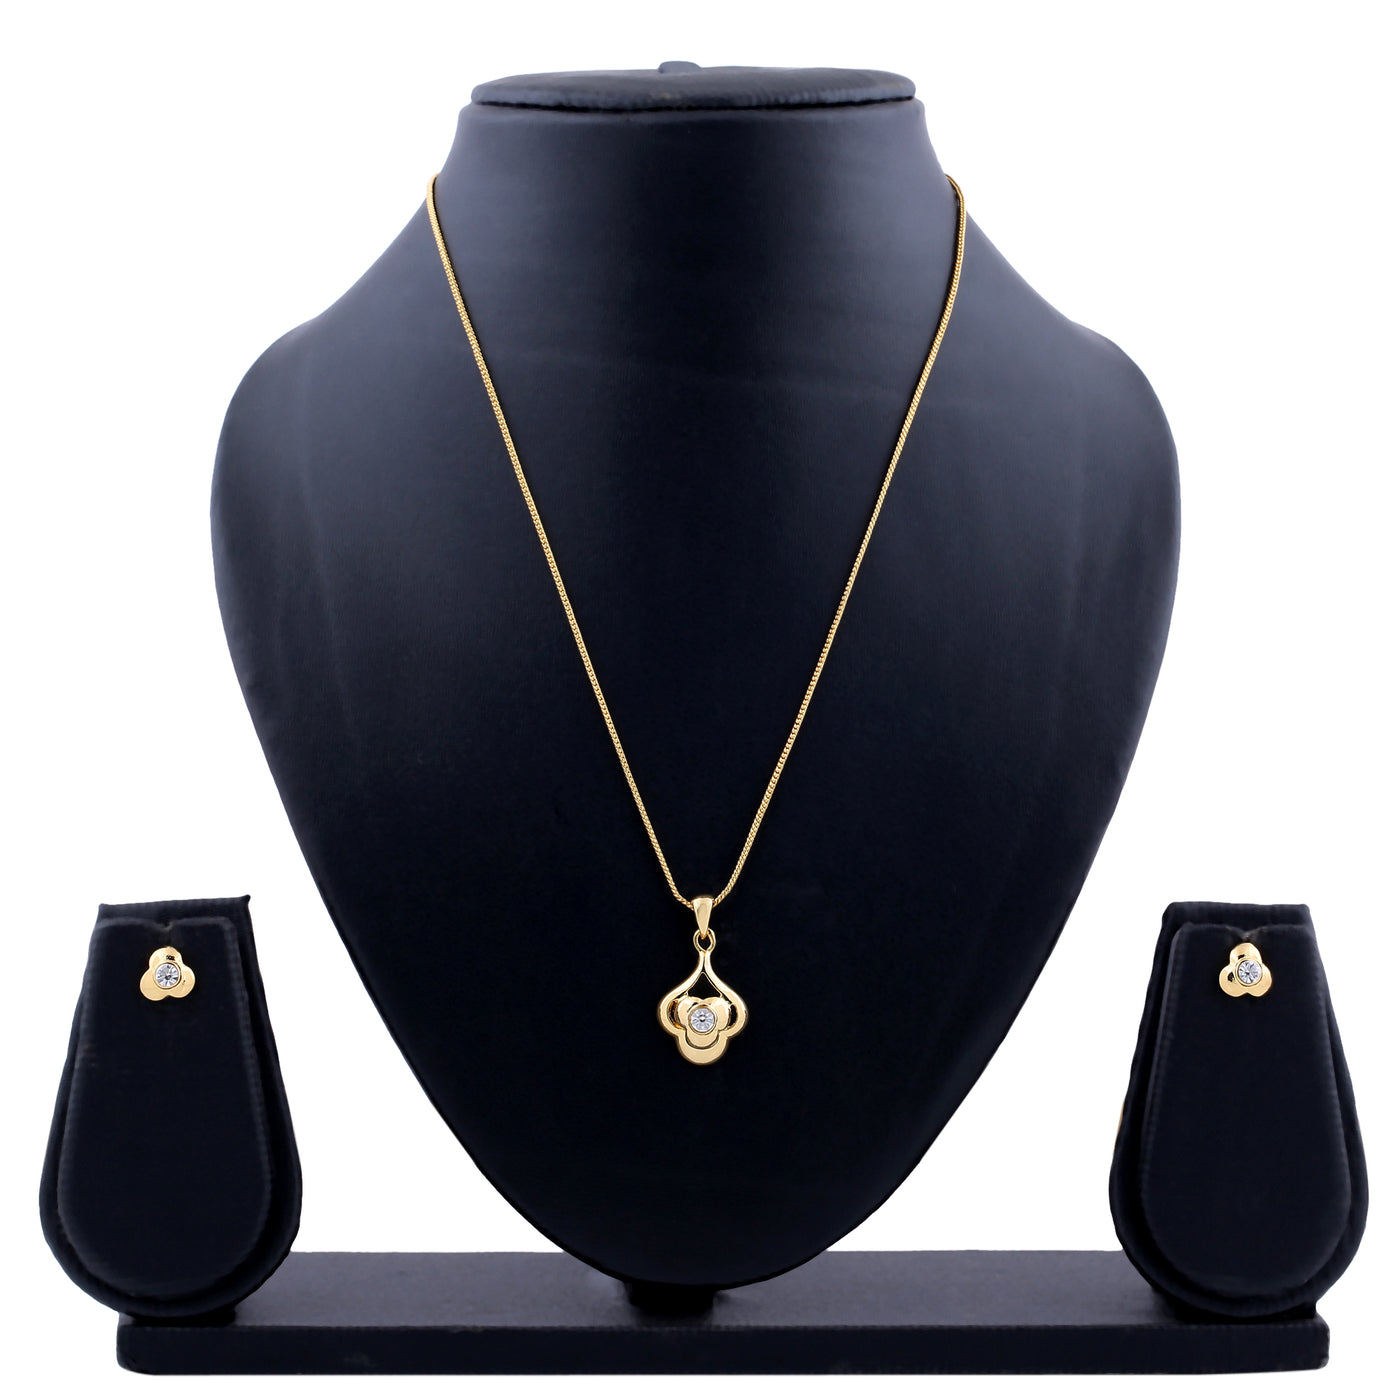 Estele - 24 CT gold plated AD and gold flower Pendant Set for Women